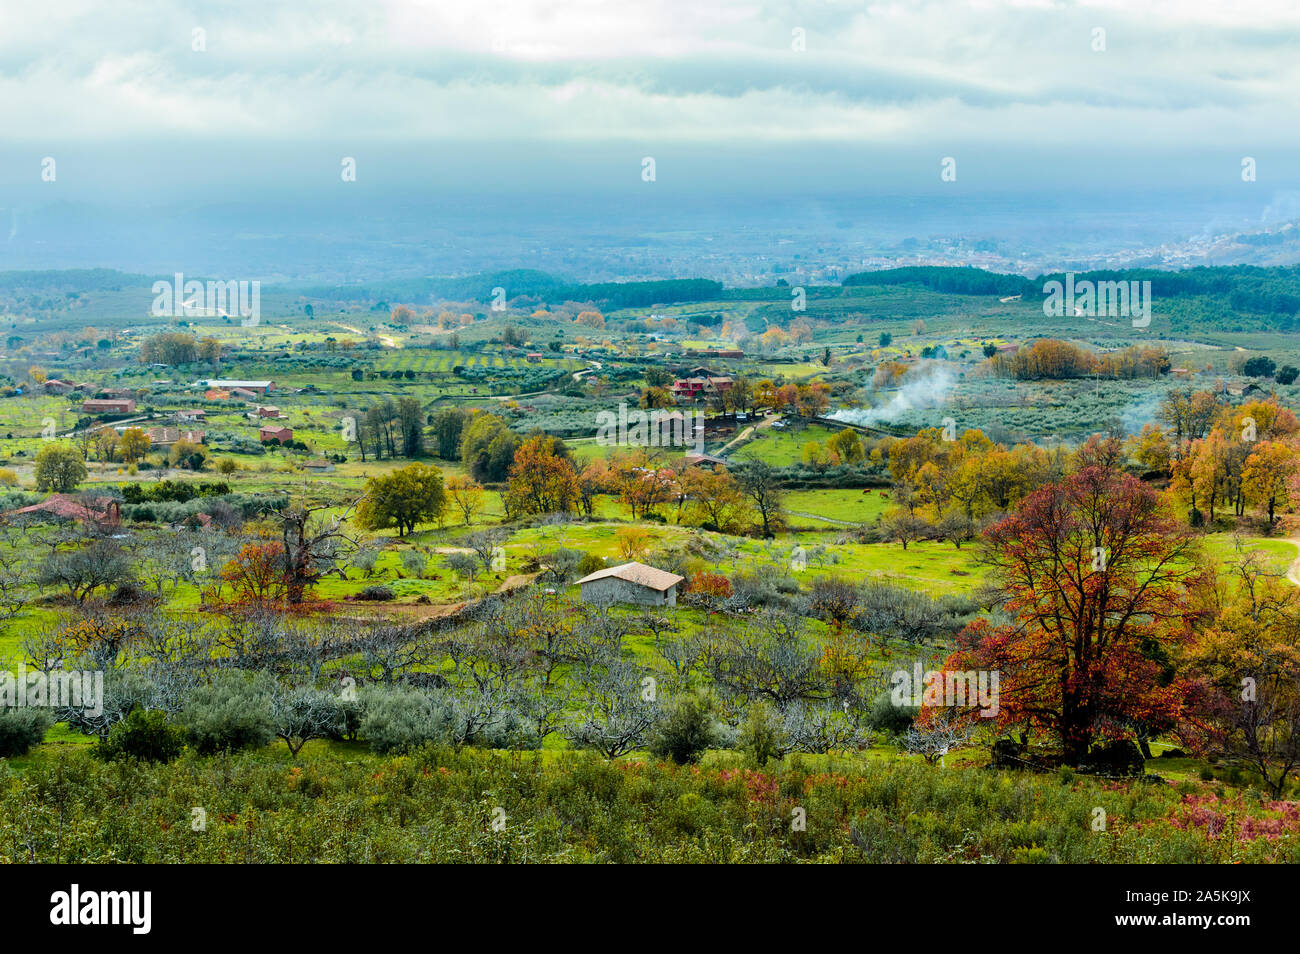 Beautiful Autumnal Print With A Landscape Full Of Vegetation Farms And Large Green Pastures In The Freillo. December 15, 2018. El Raso Avila Castilla Stock Photo